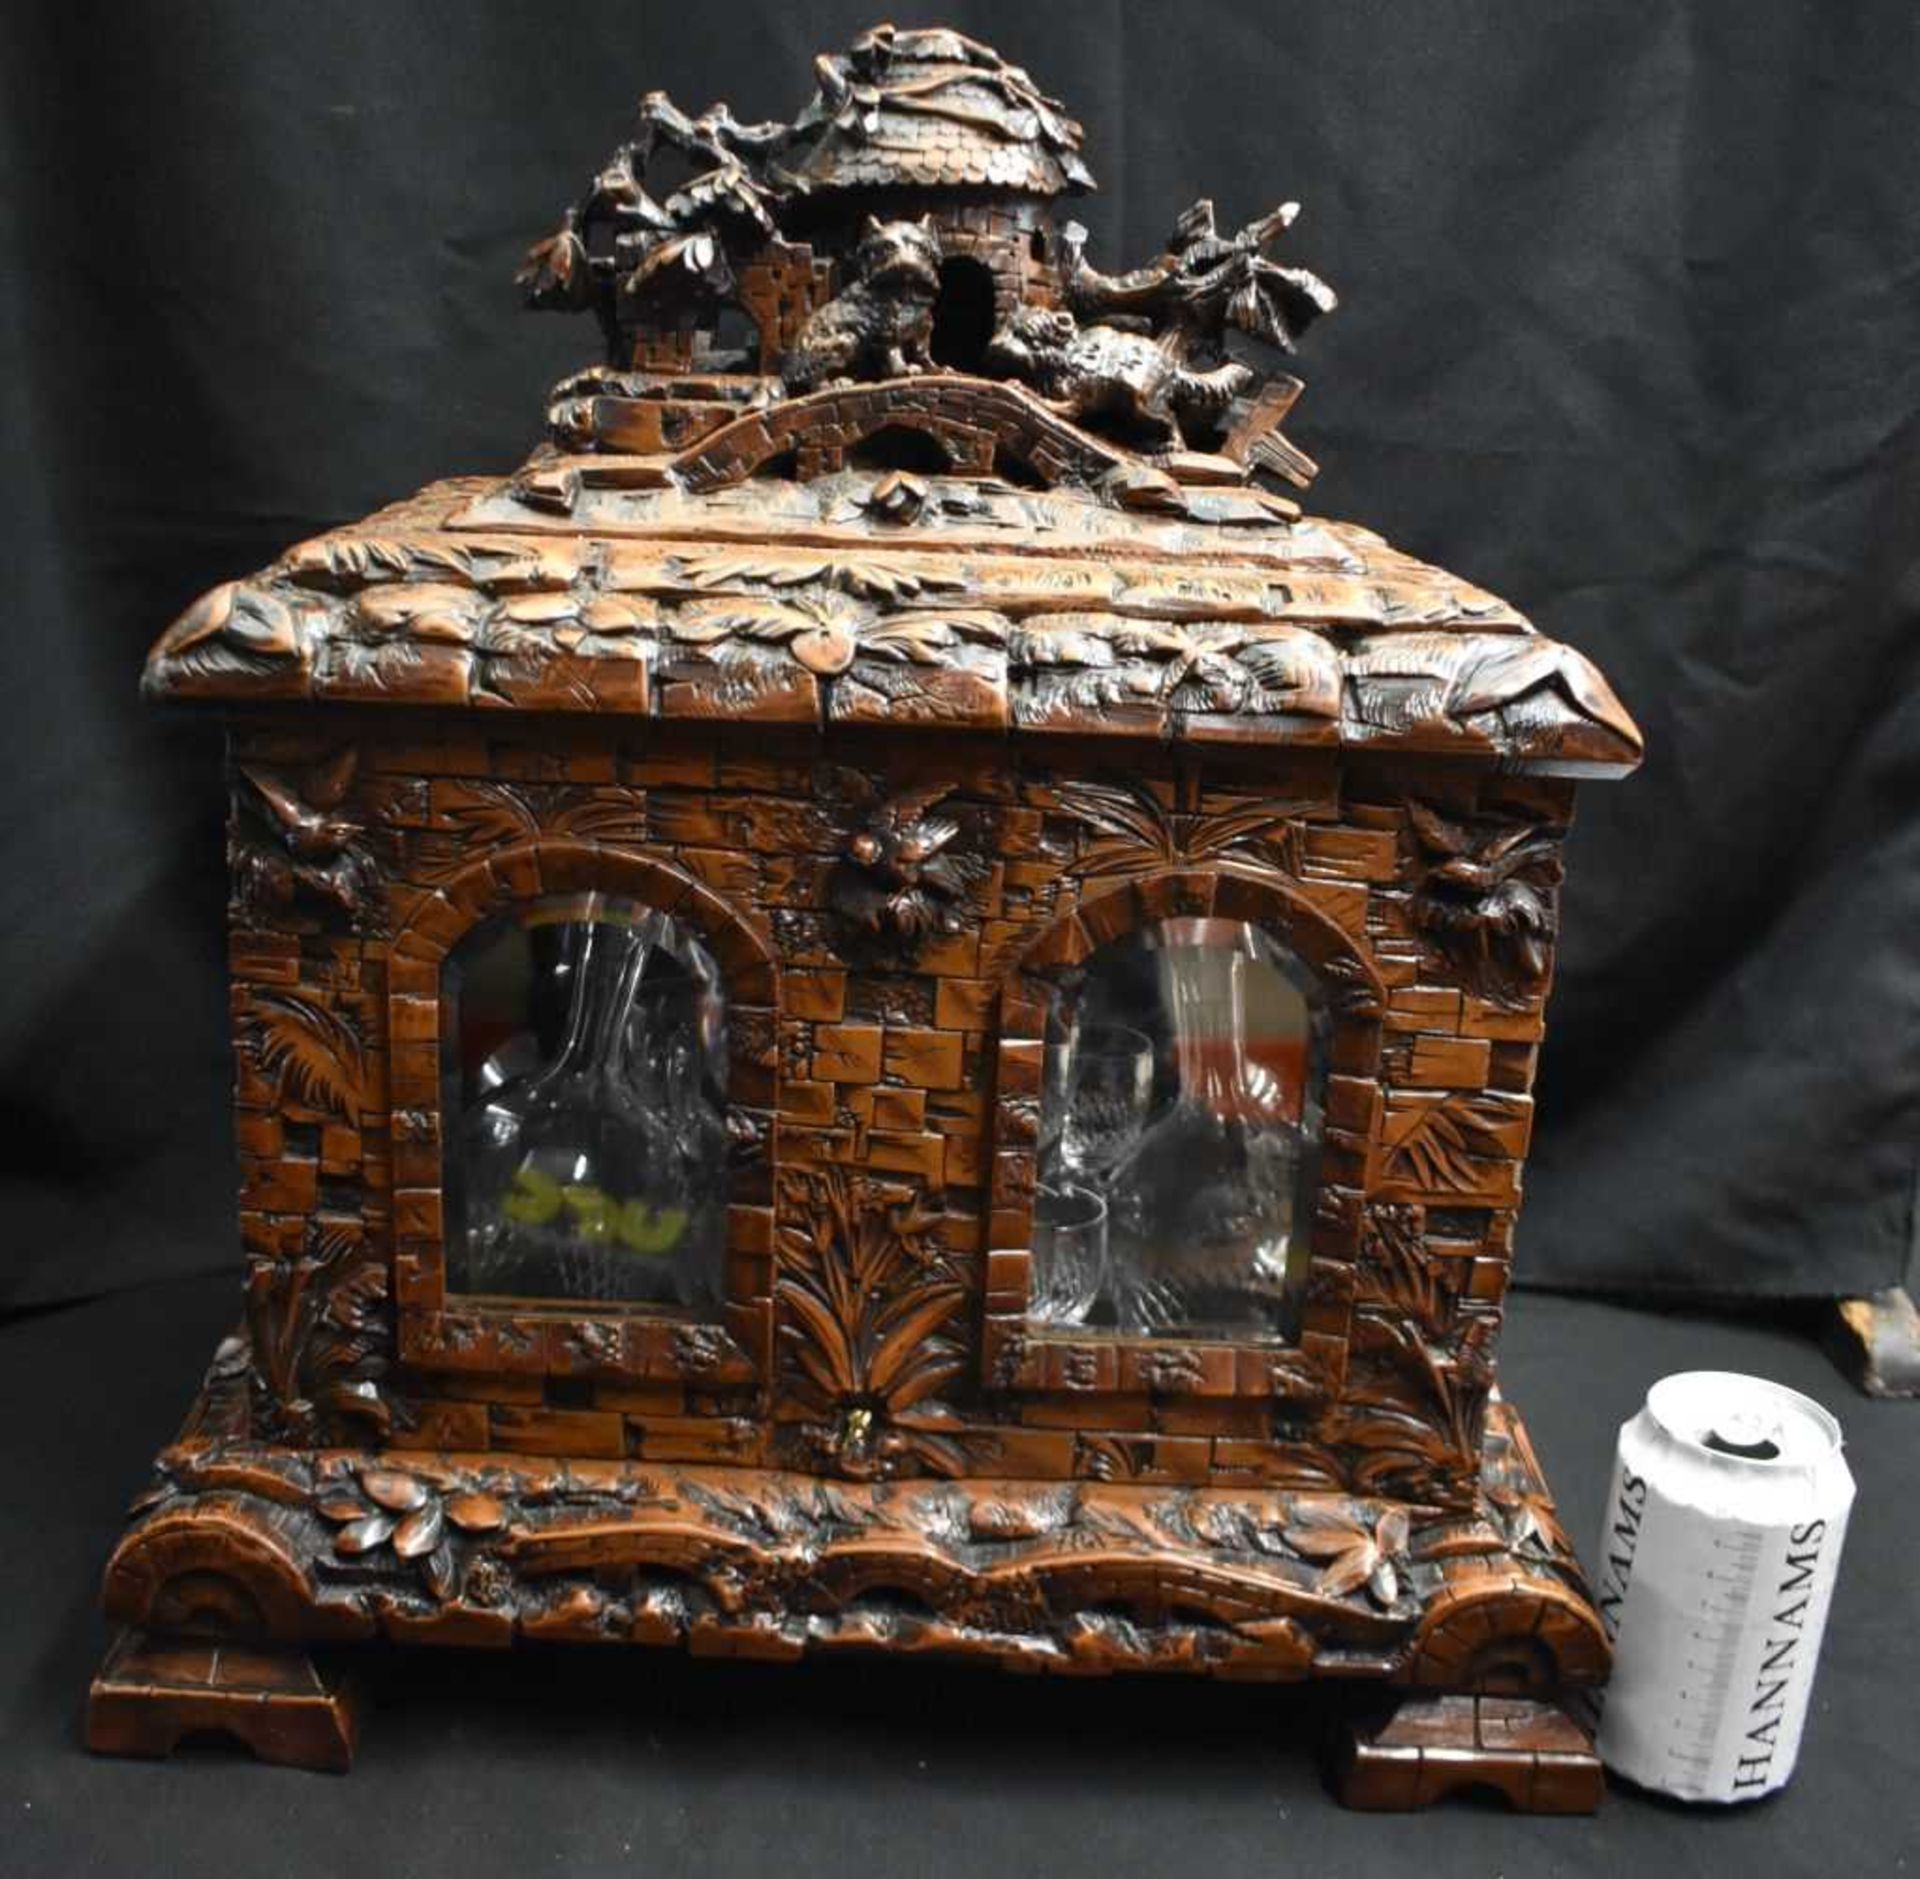 A LOVELY LARGE 19TH CENTURY BAVARIAN BLACK FOREST CARVED WOOD DECANTER BOX formed as an open work